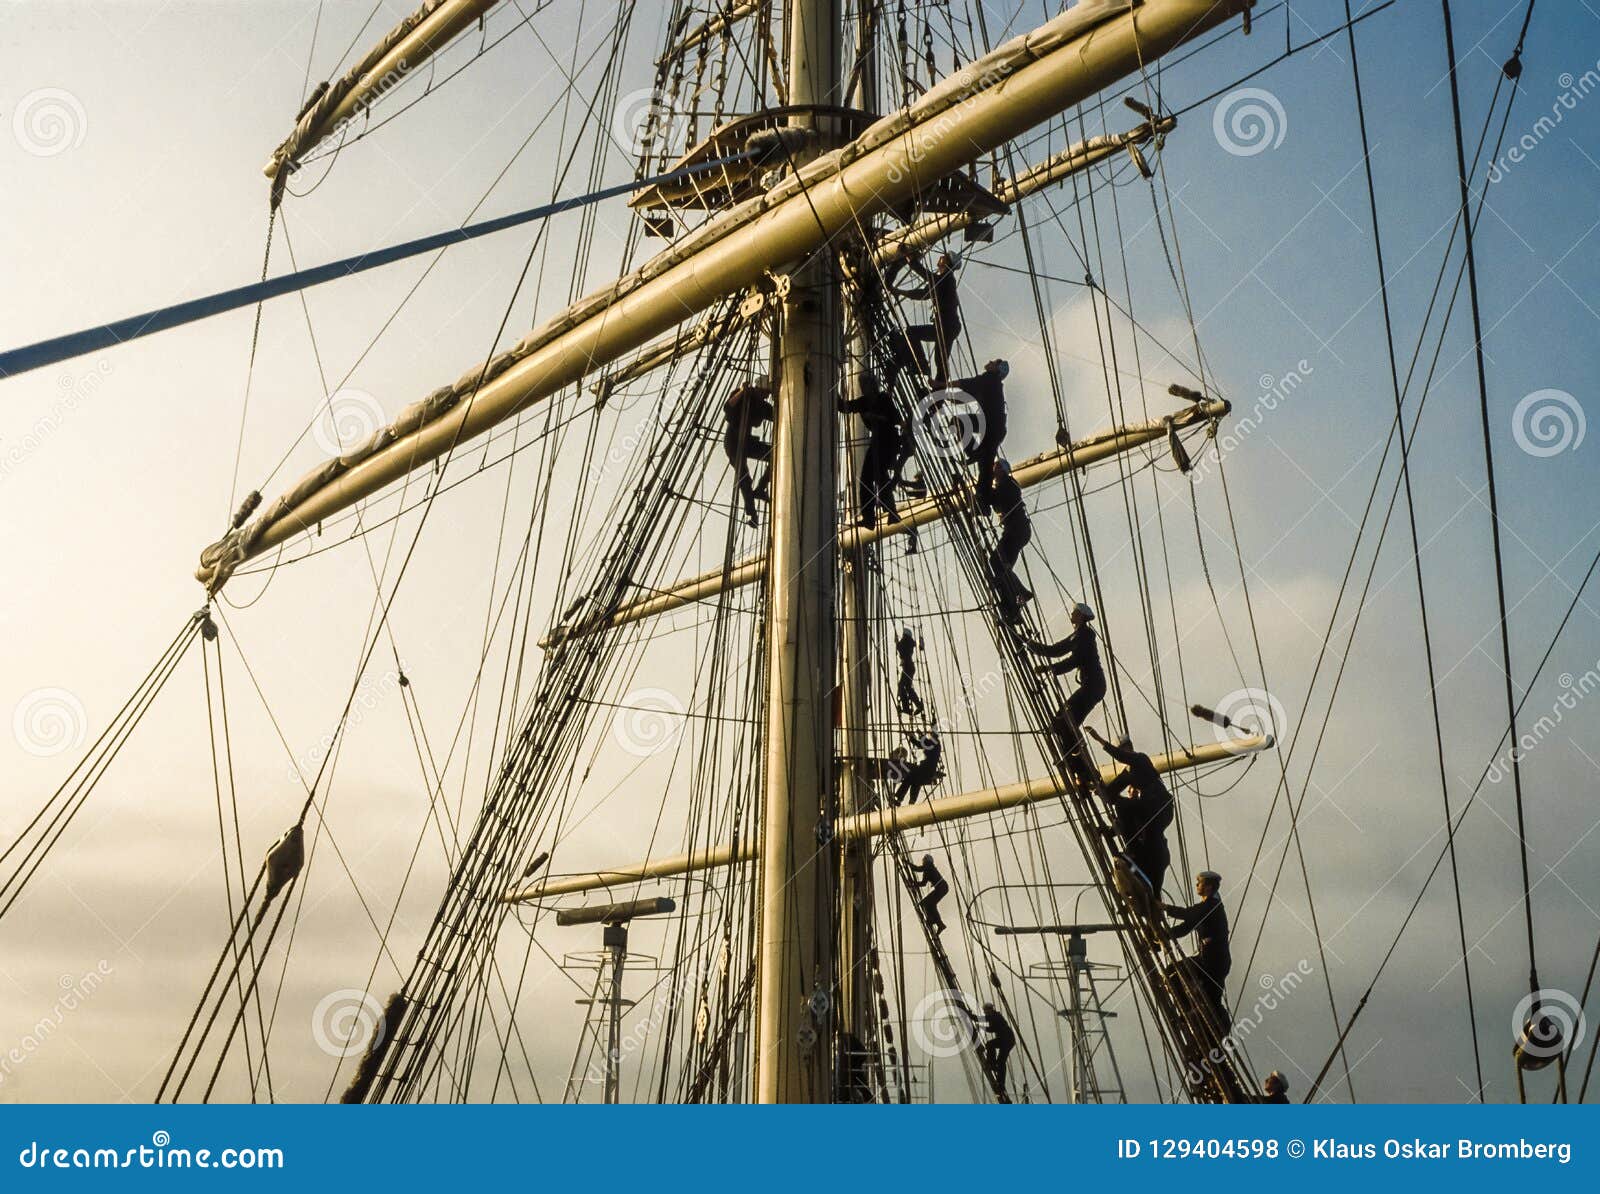 training of cadets climbing the rigging.